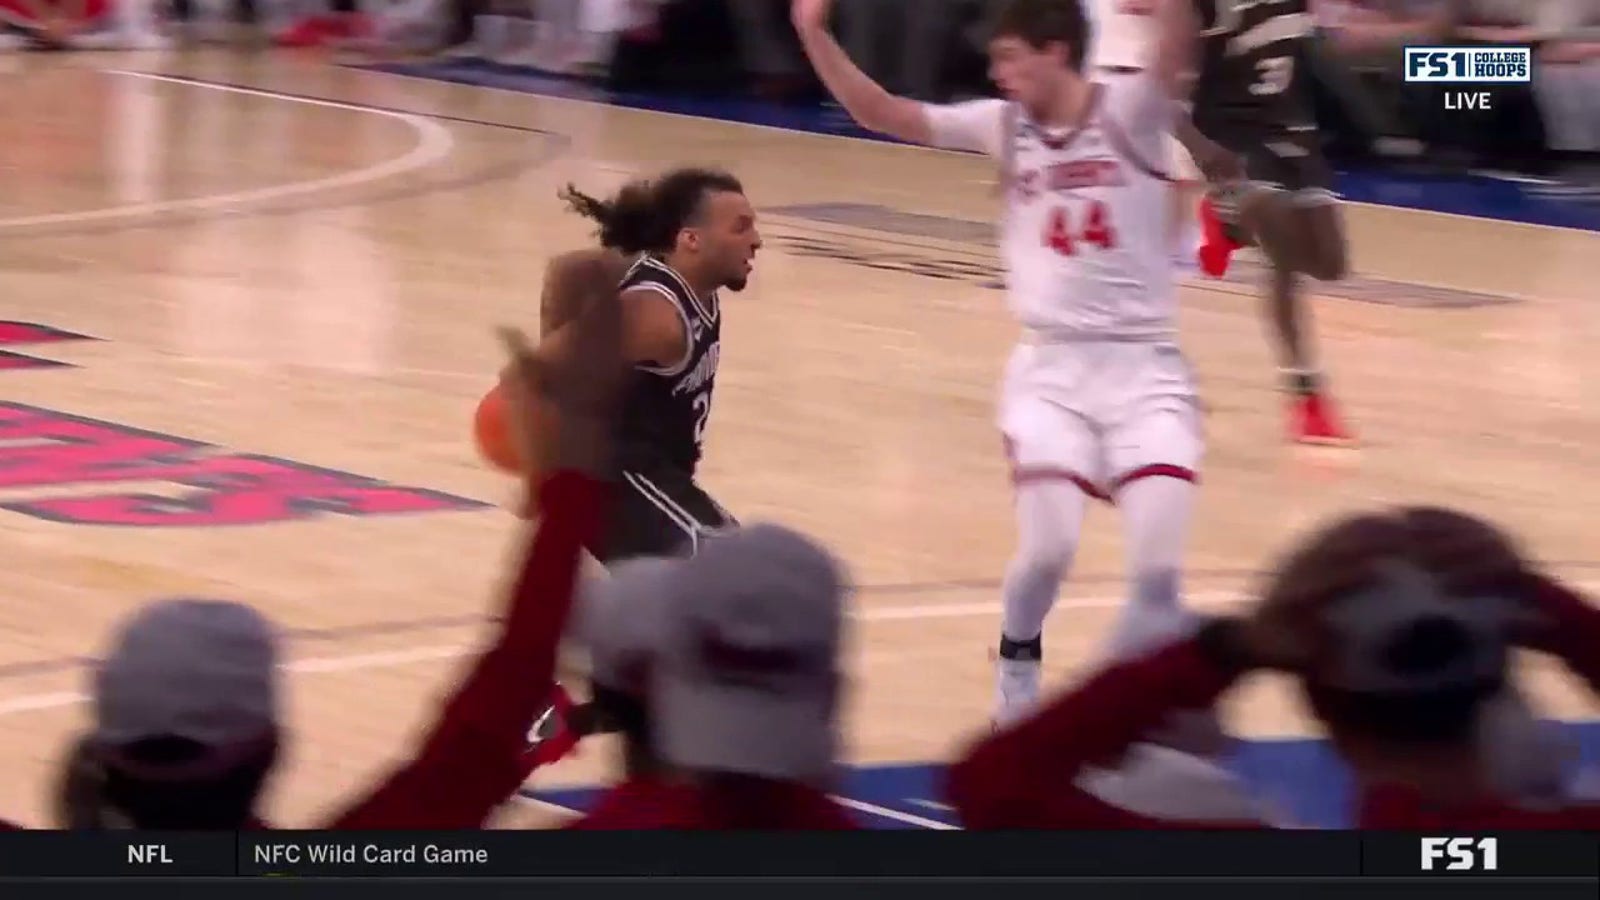 Providence's Devin Carter loses the defender and finishes the tough bucket vs. St. John's